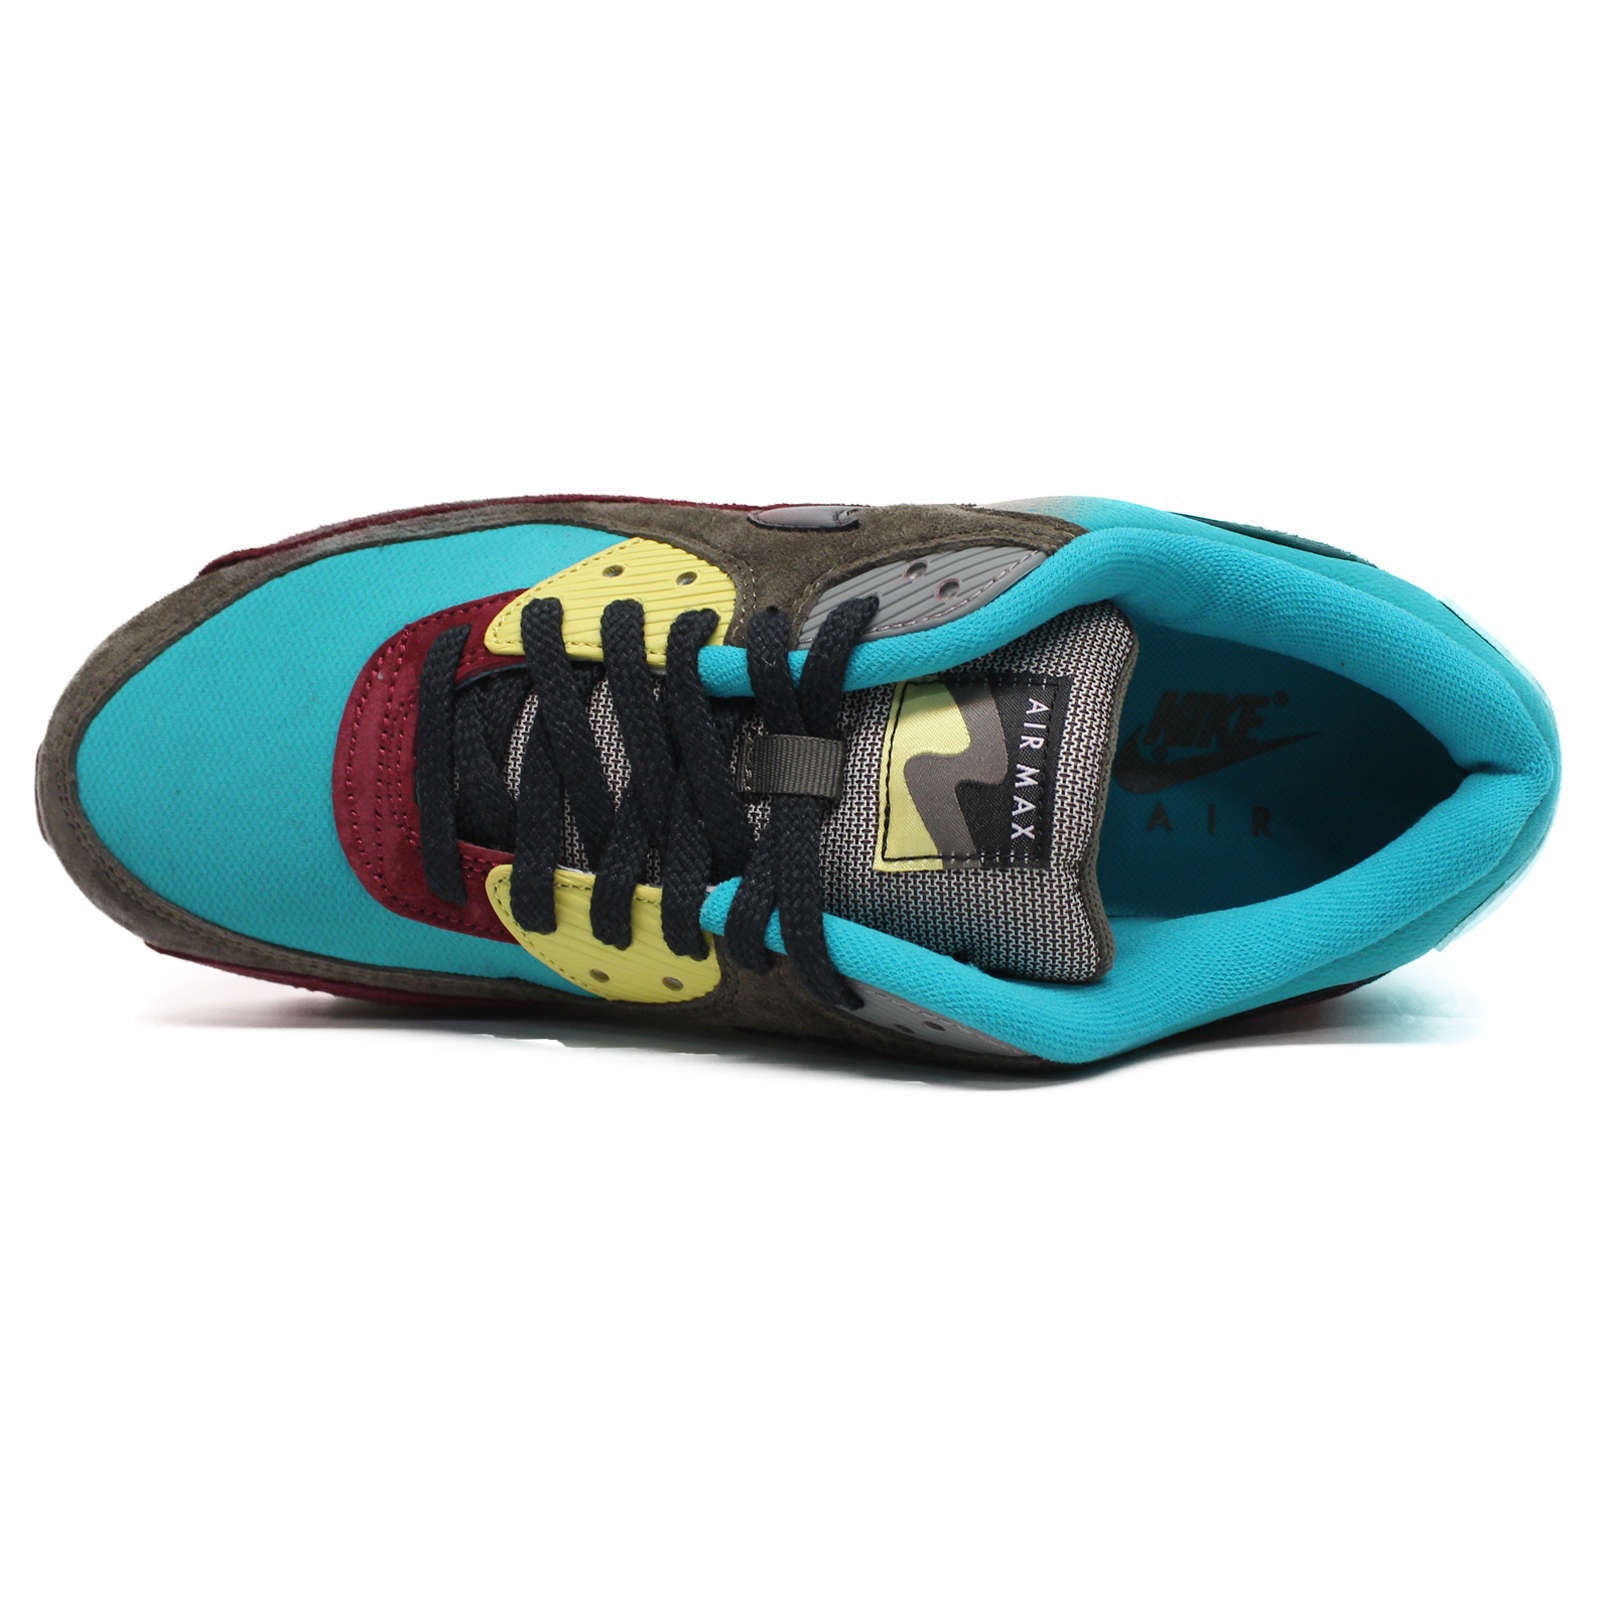 Nike Air Max 90 NRG Suede Leather Unisex Low-Top Trainers#color_ridgerock black turbo green